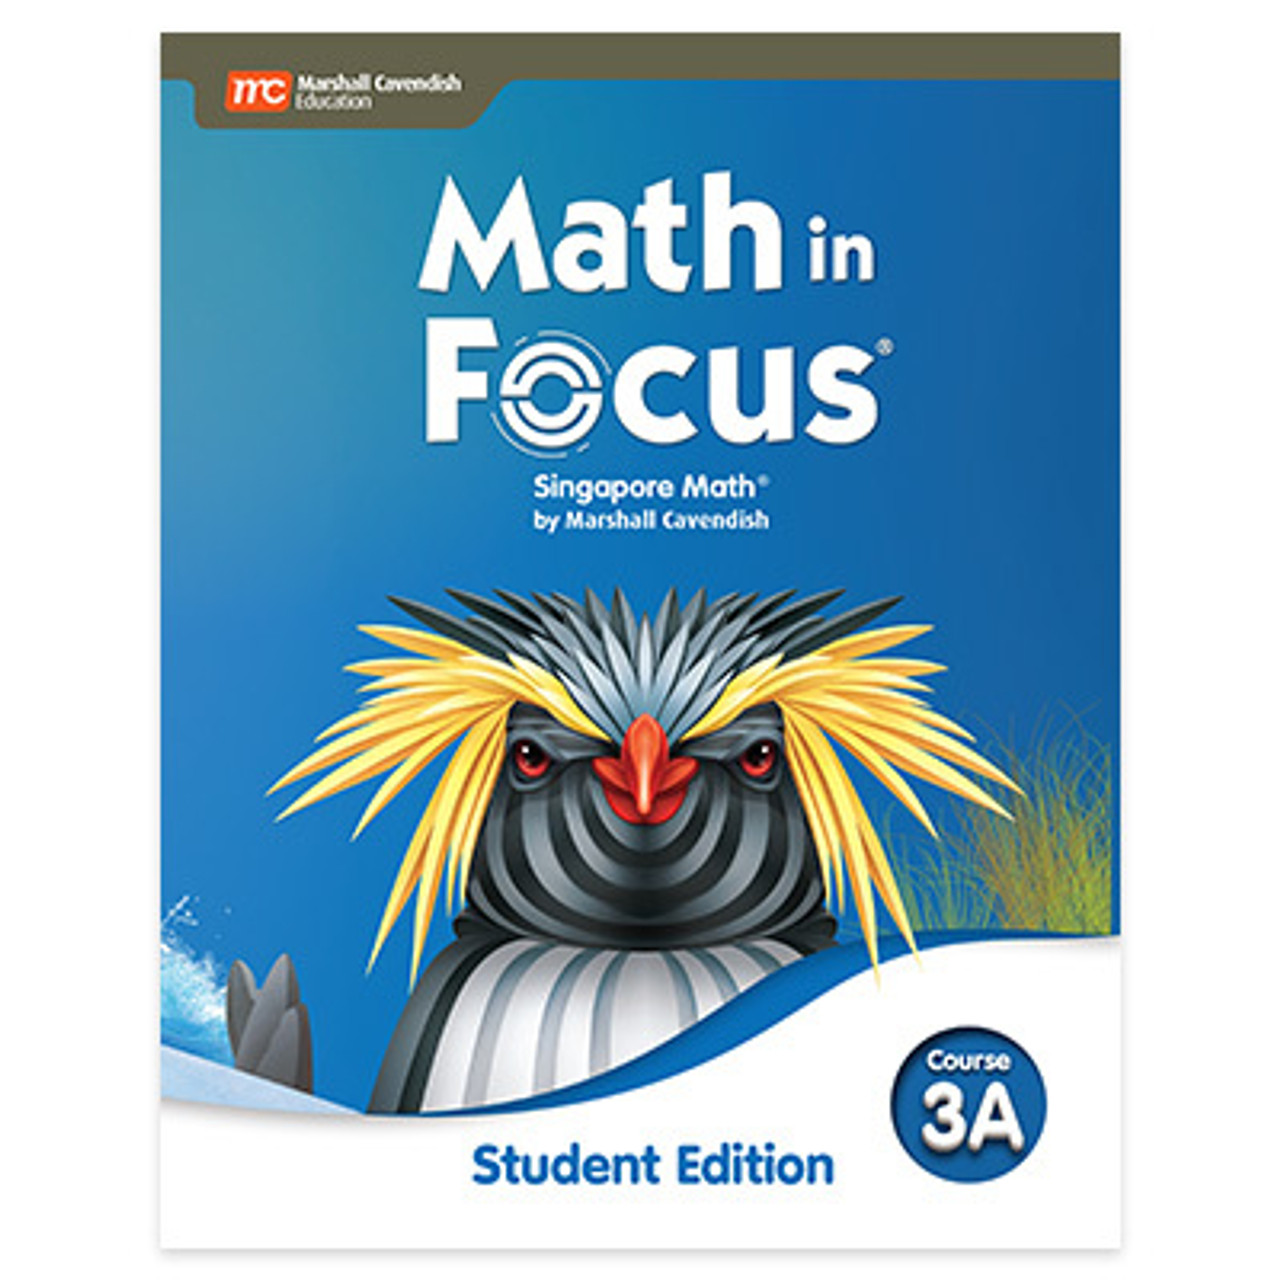 Focus　Volume　Edition　Student　Course　Math　2020　in　A